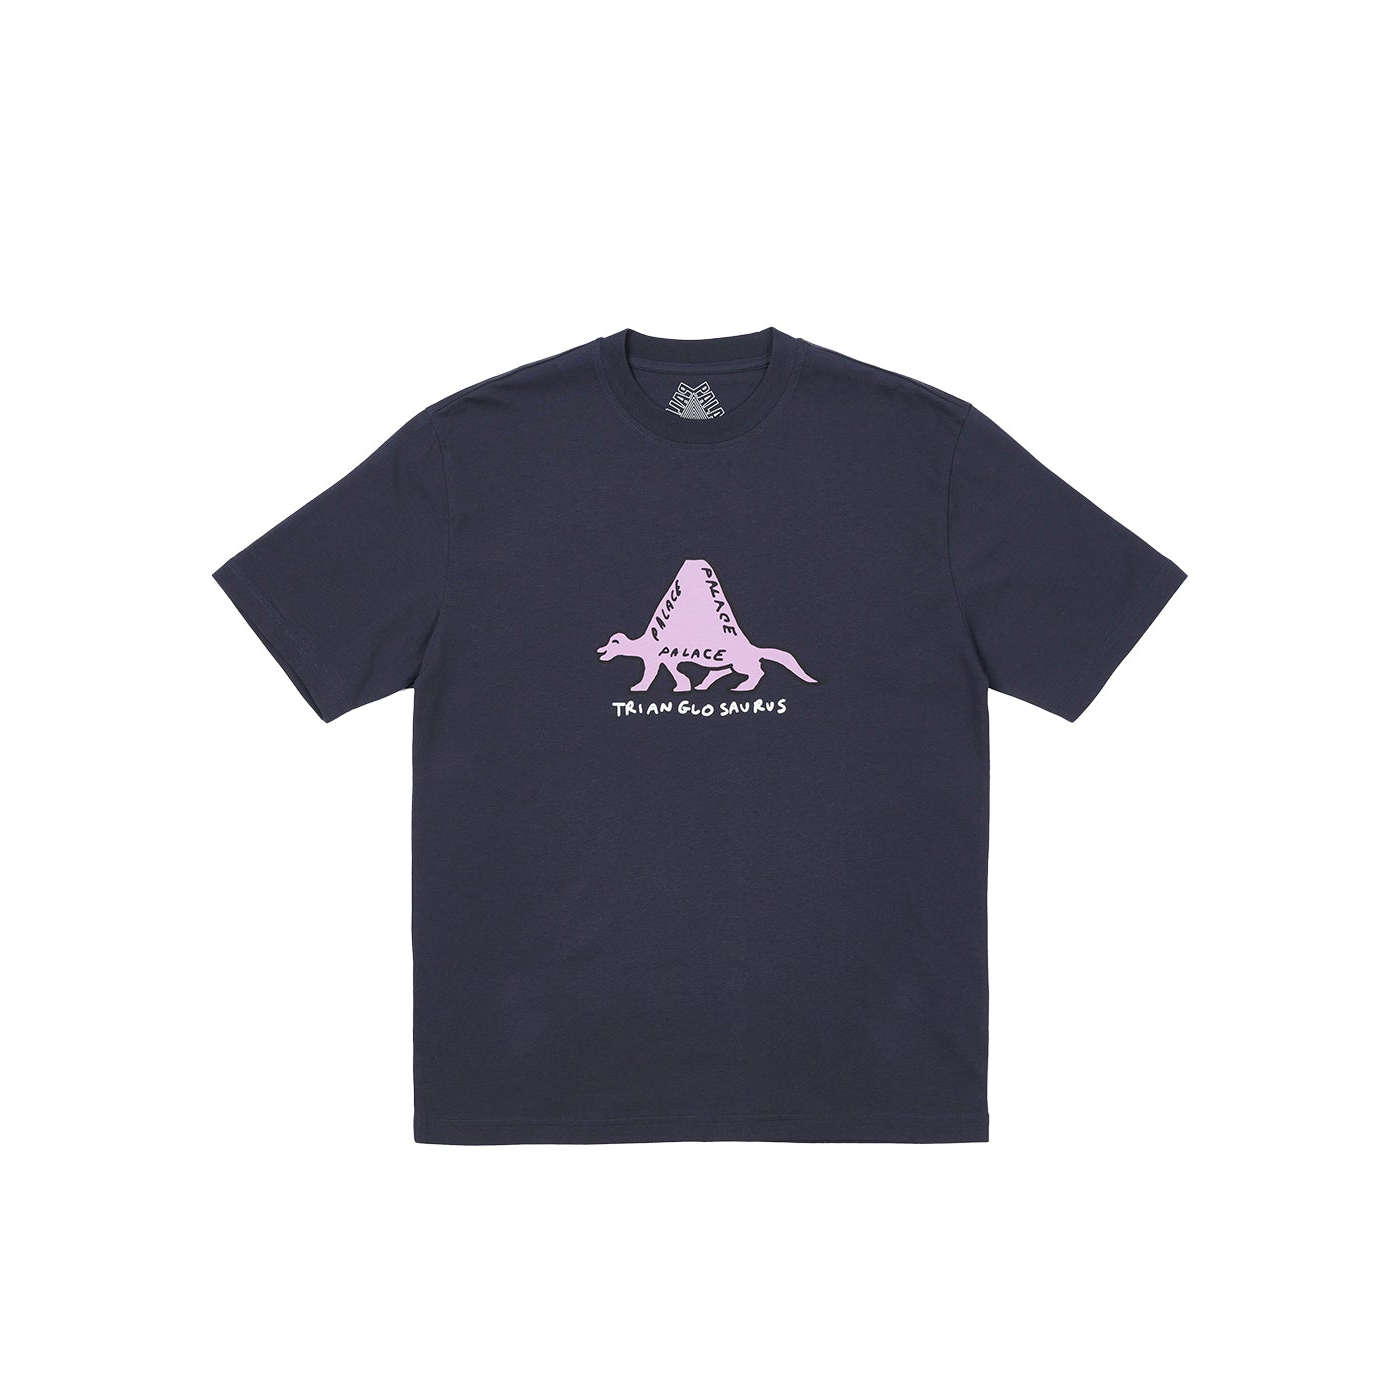 Thumbnail TRIANGLOSAURUS T-SHIRT NAVY one color